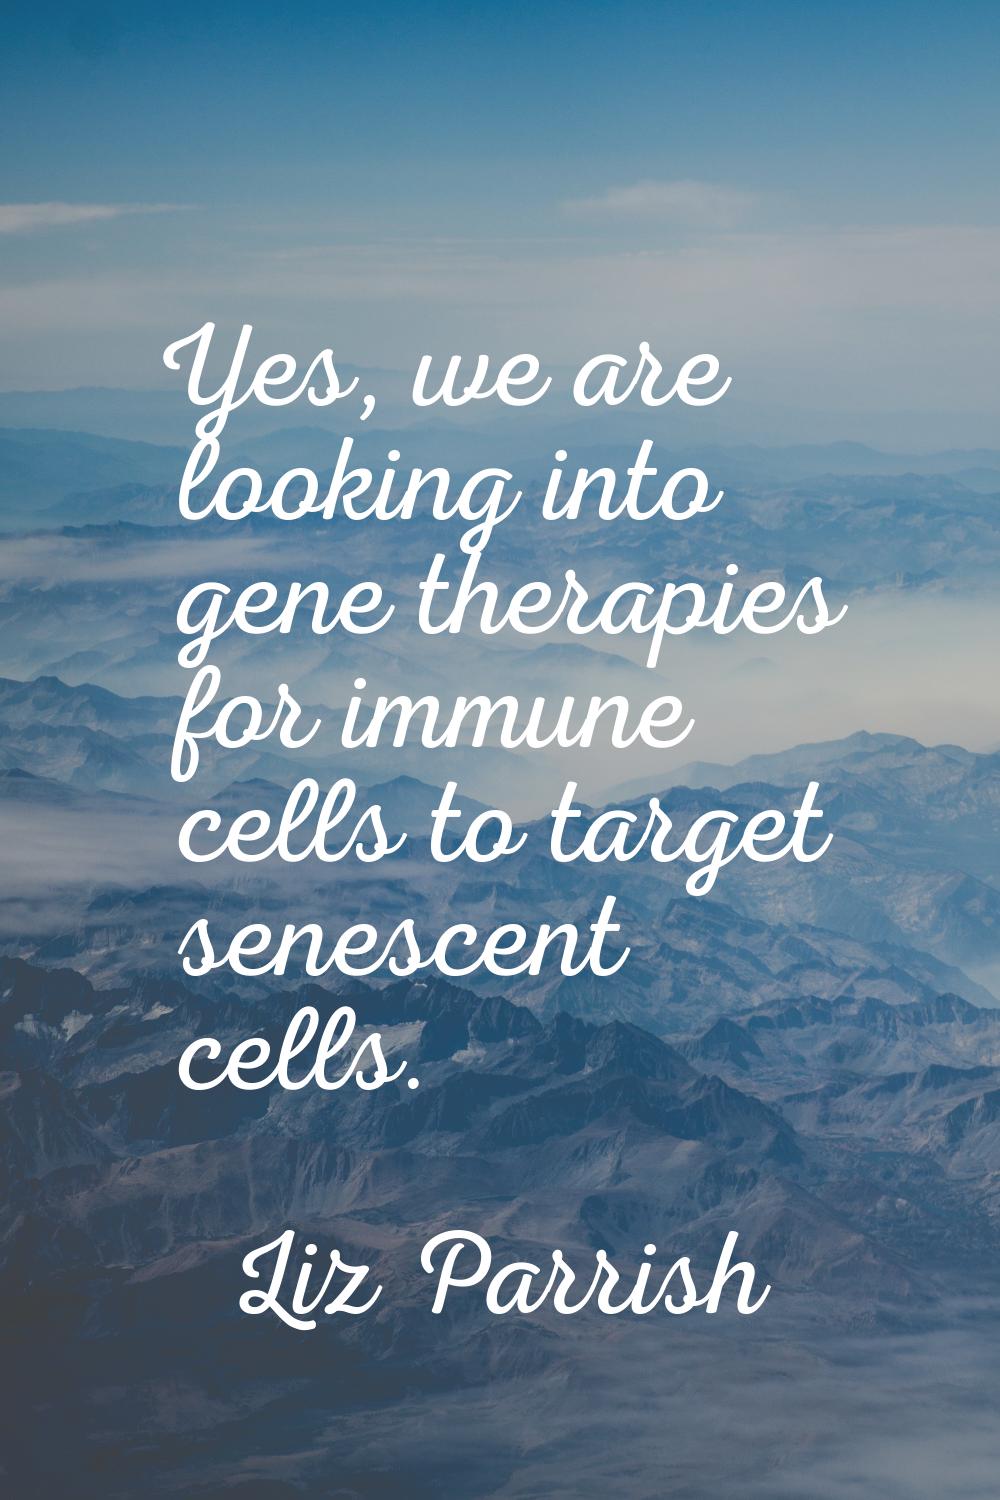 Yes, we are looking into gene therapies for immune cells to target senescent cells.